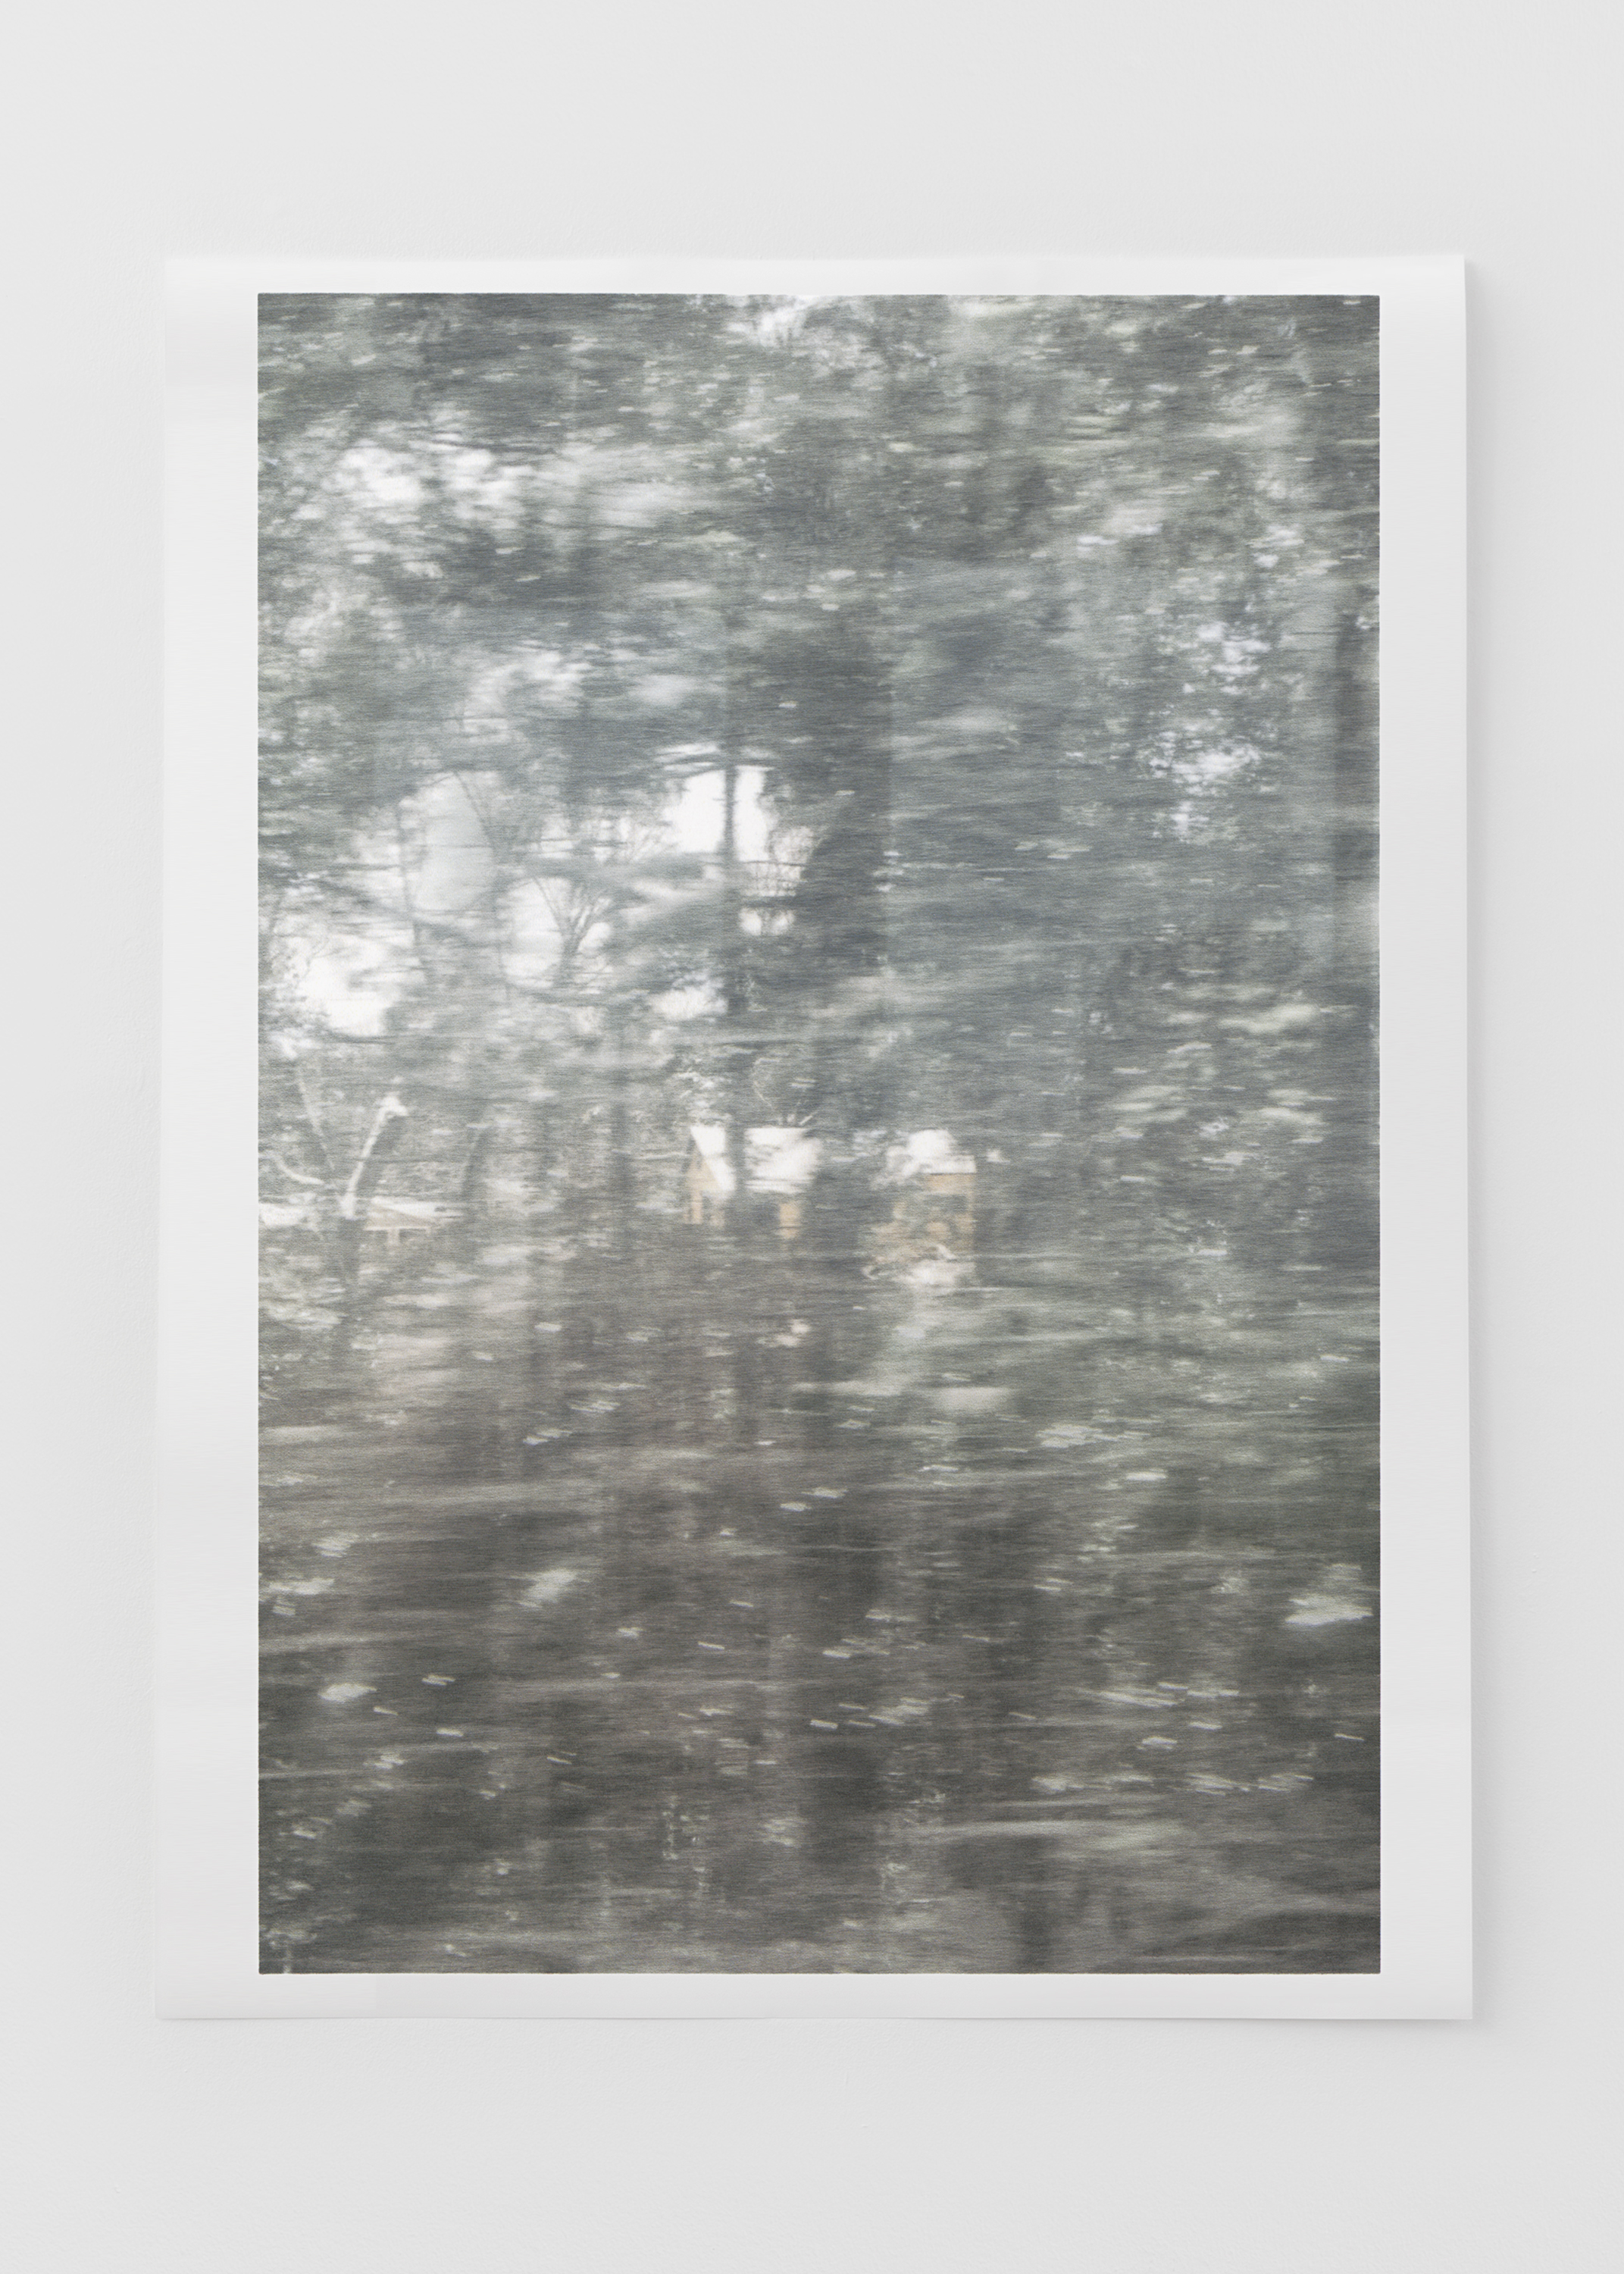   Untitled (glass, forest, house) , pigment print on paper, sheet: 98.1 × 72 cm (38 5/8 × 28 3/8 in), framed: 109 × 82.4 cm (42 7/8 × 32 1/2 in), 2019  Installation view of “the sacredness of something” at Arc One Gallery, Melbourne (2019) 